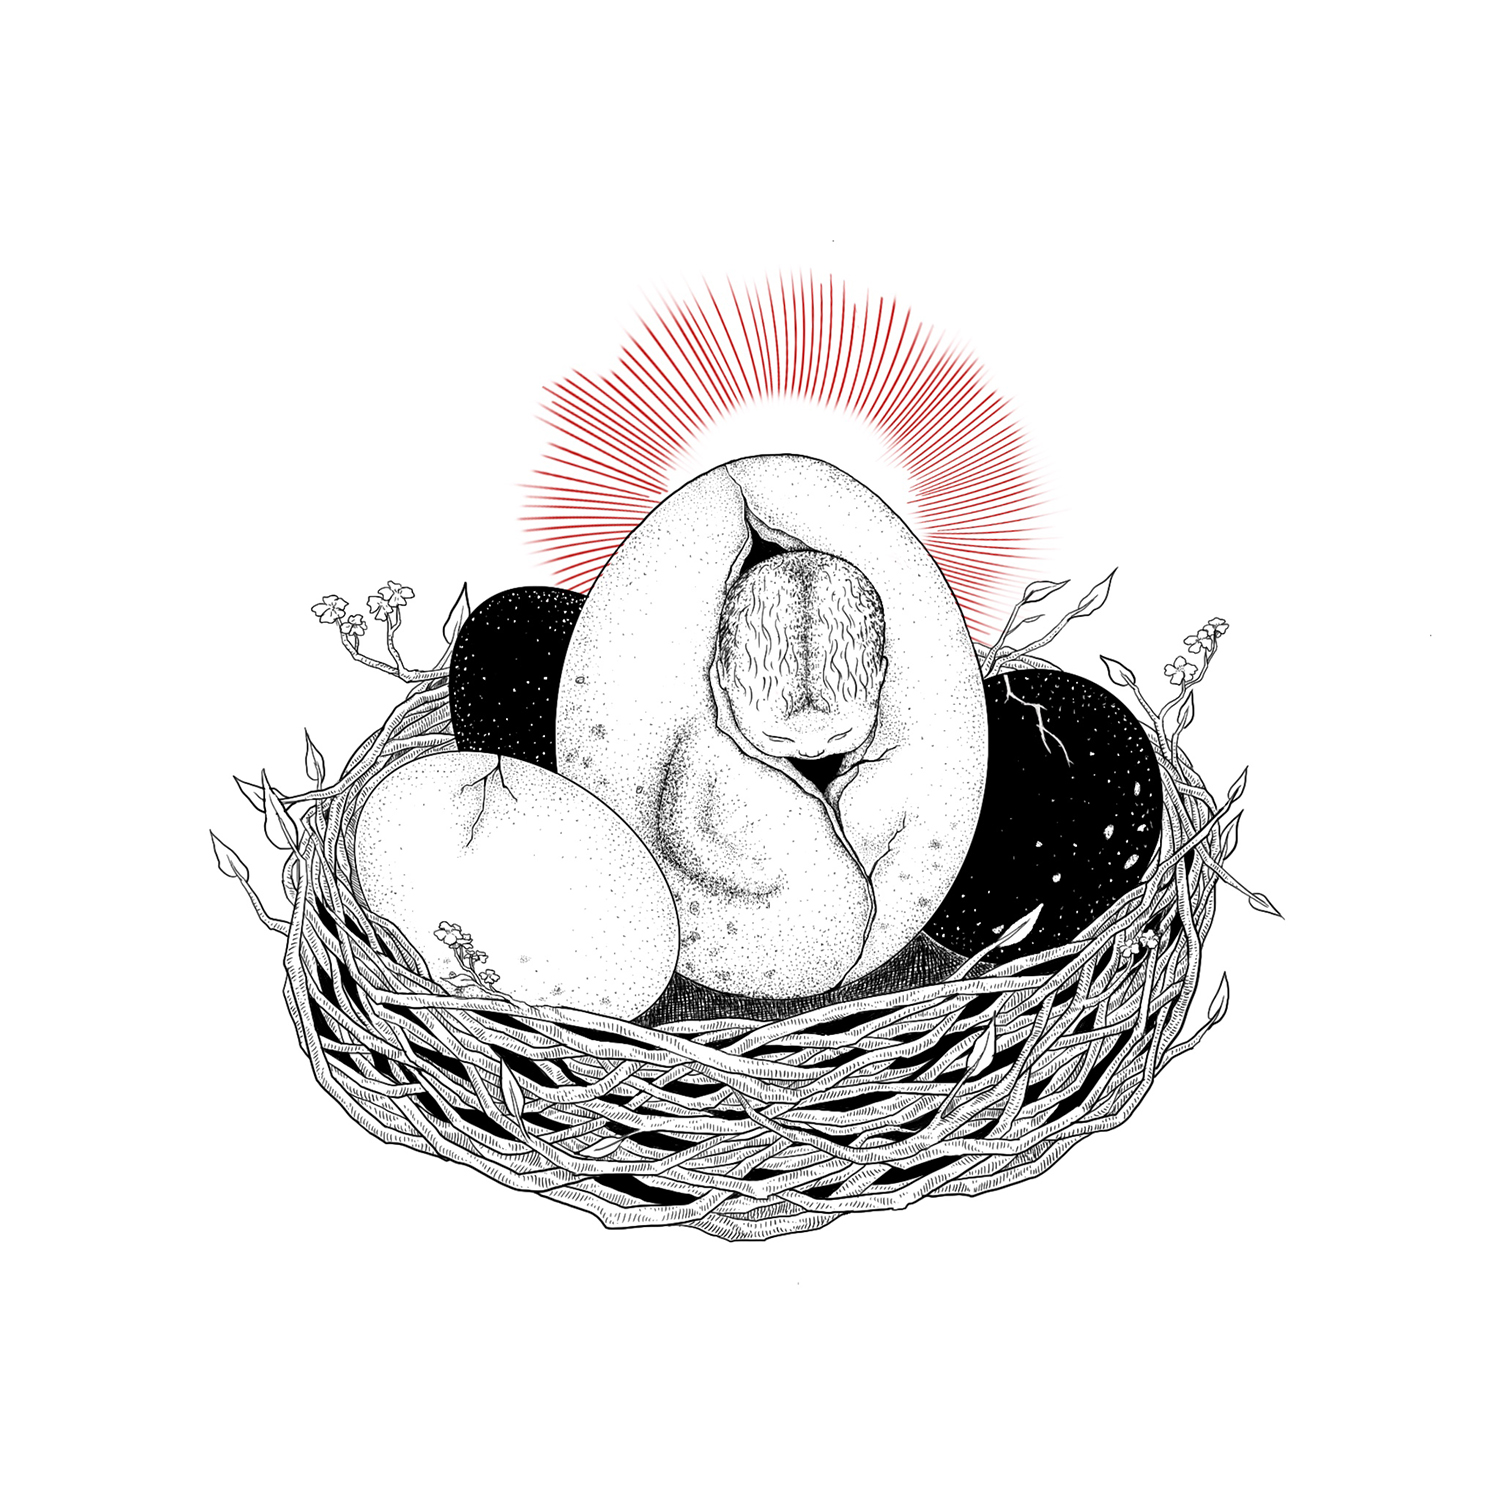 Ullustration of a child being born from an egg